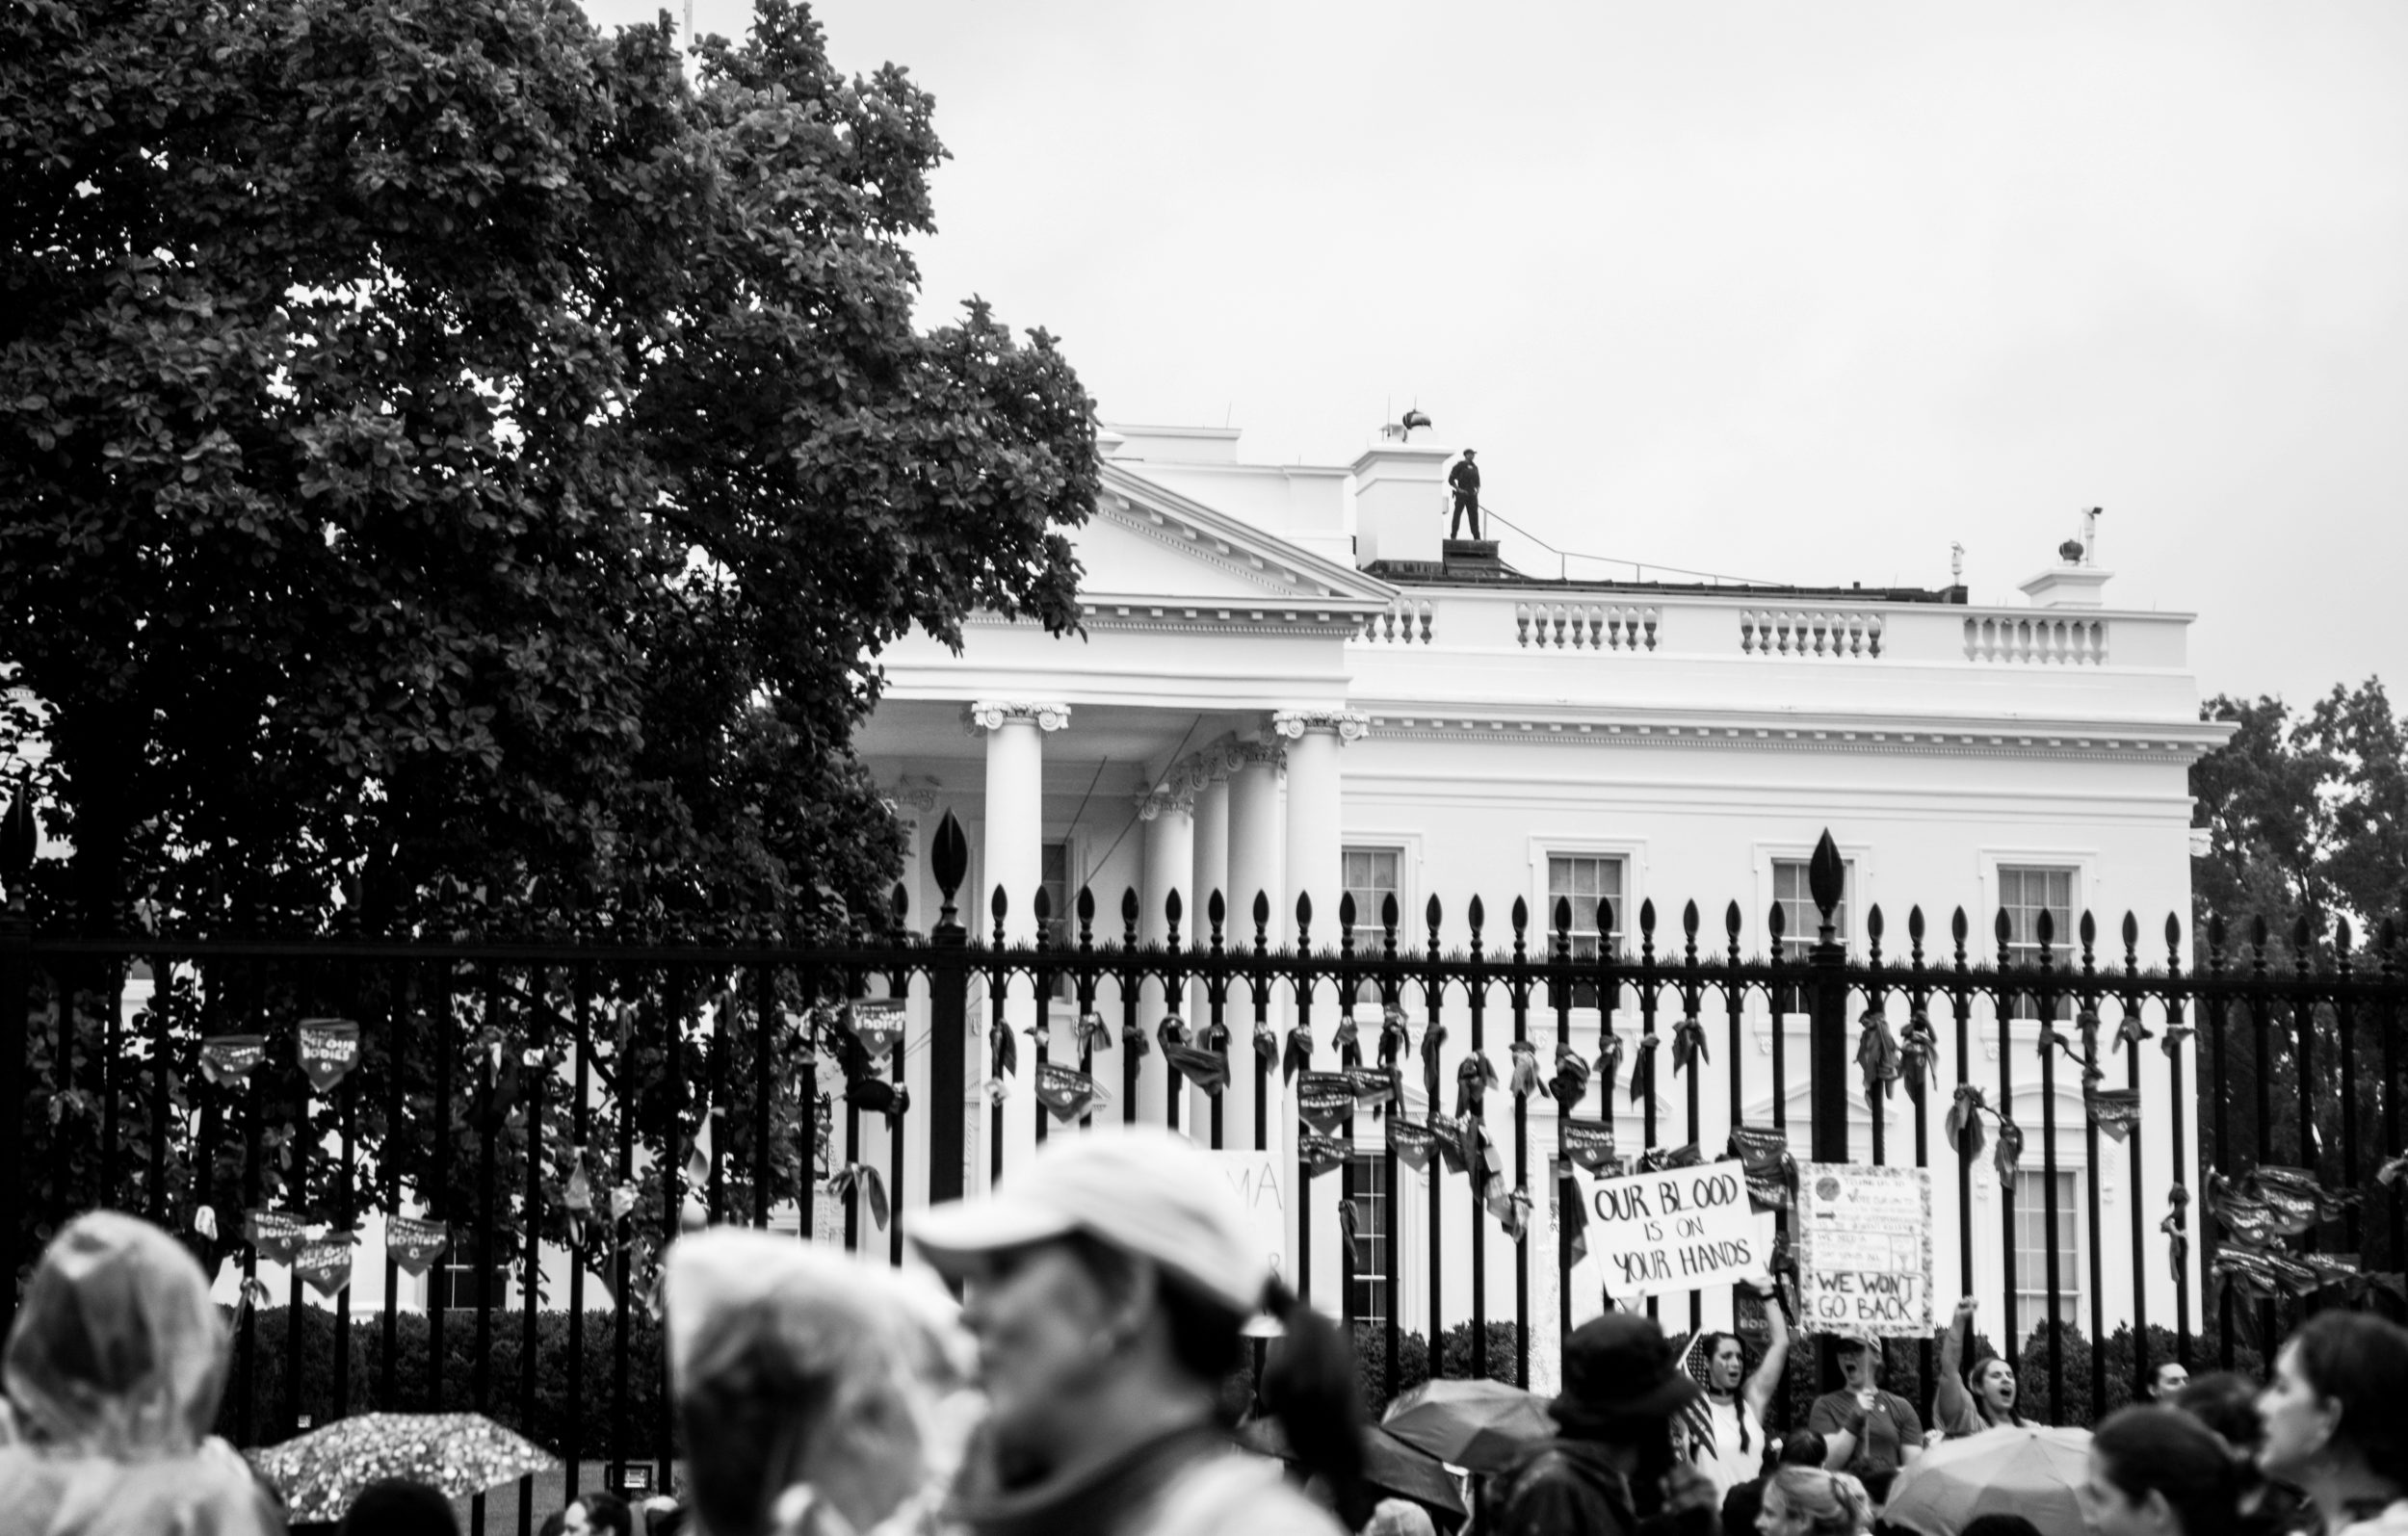 The police and secret service gave protestors the space and time to be heard and I was shockingly impressed at their decision to allow the protest to continue. But the site of periodic agents on the rooftop of the White House scanning the scene was unnerving to say the least. 